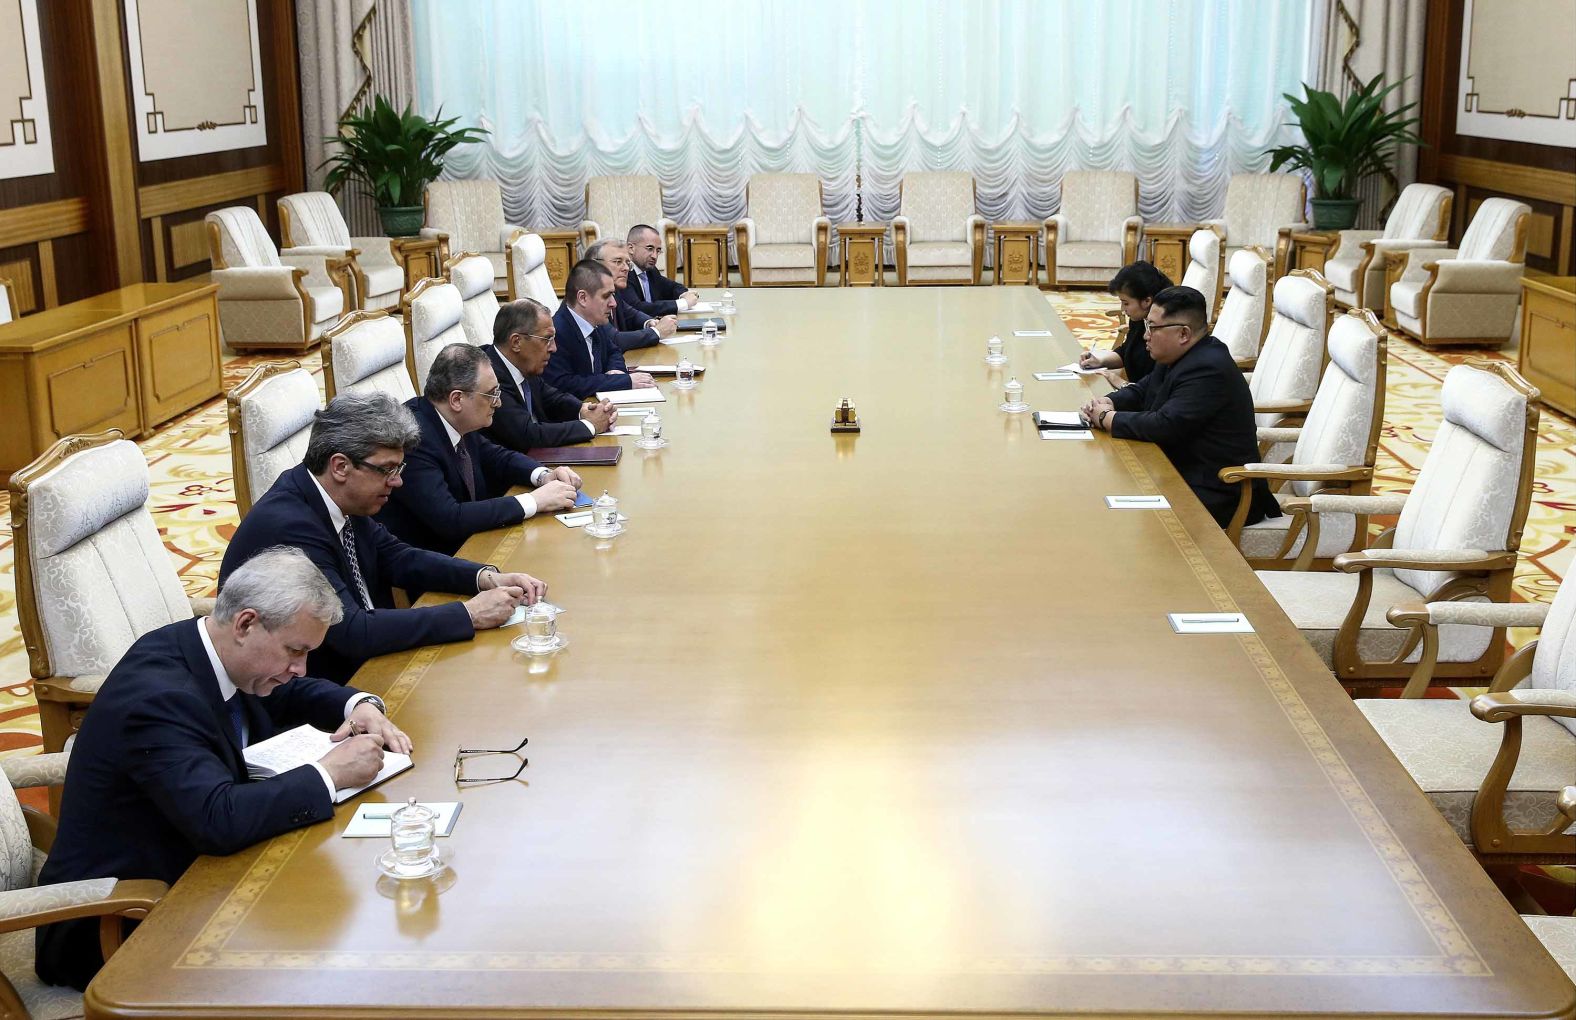 The meeting between the Russians and North Koreans carries on at Kumsusan Palace.